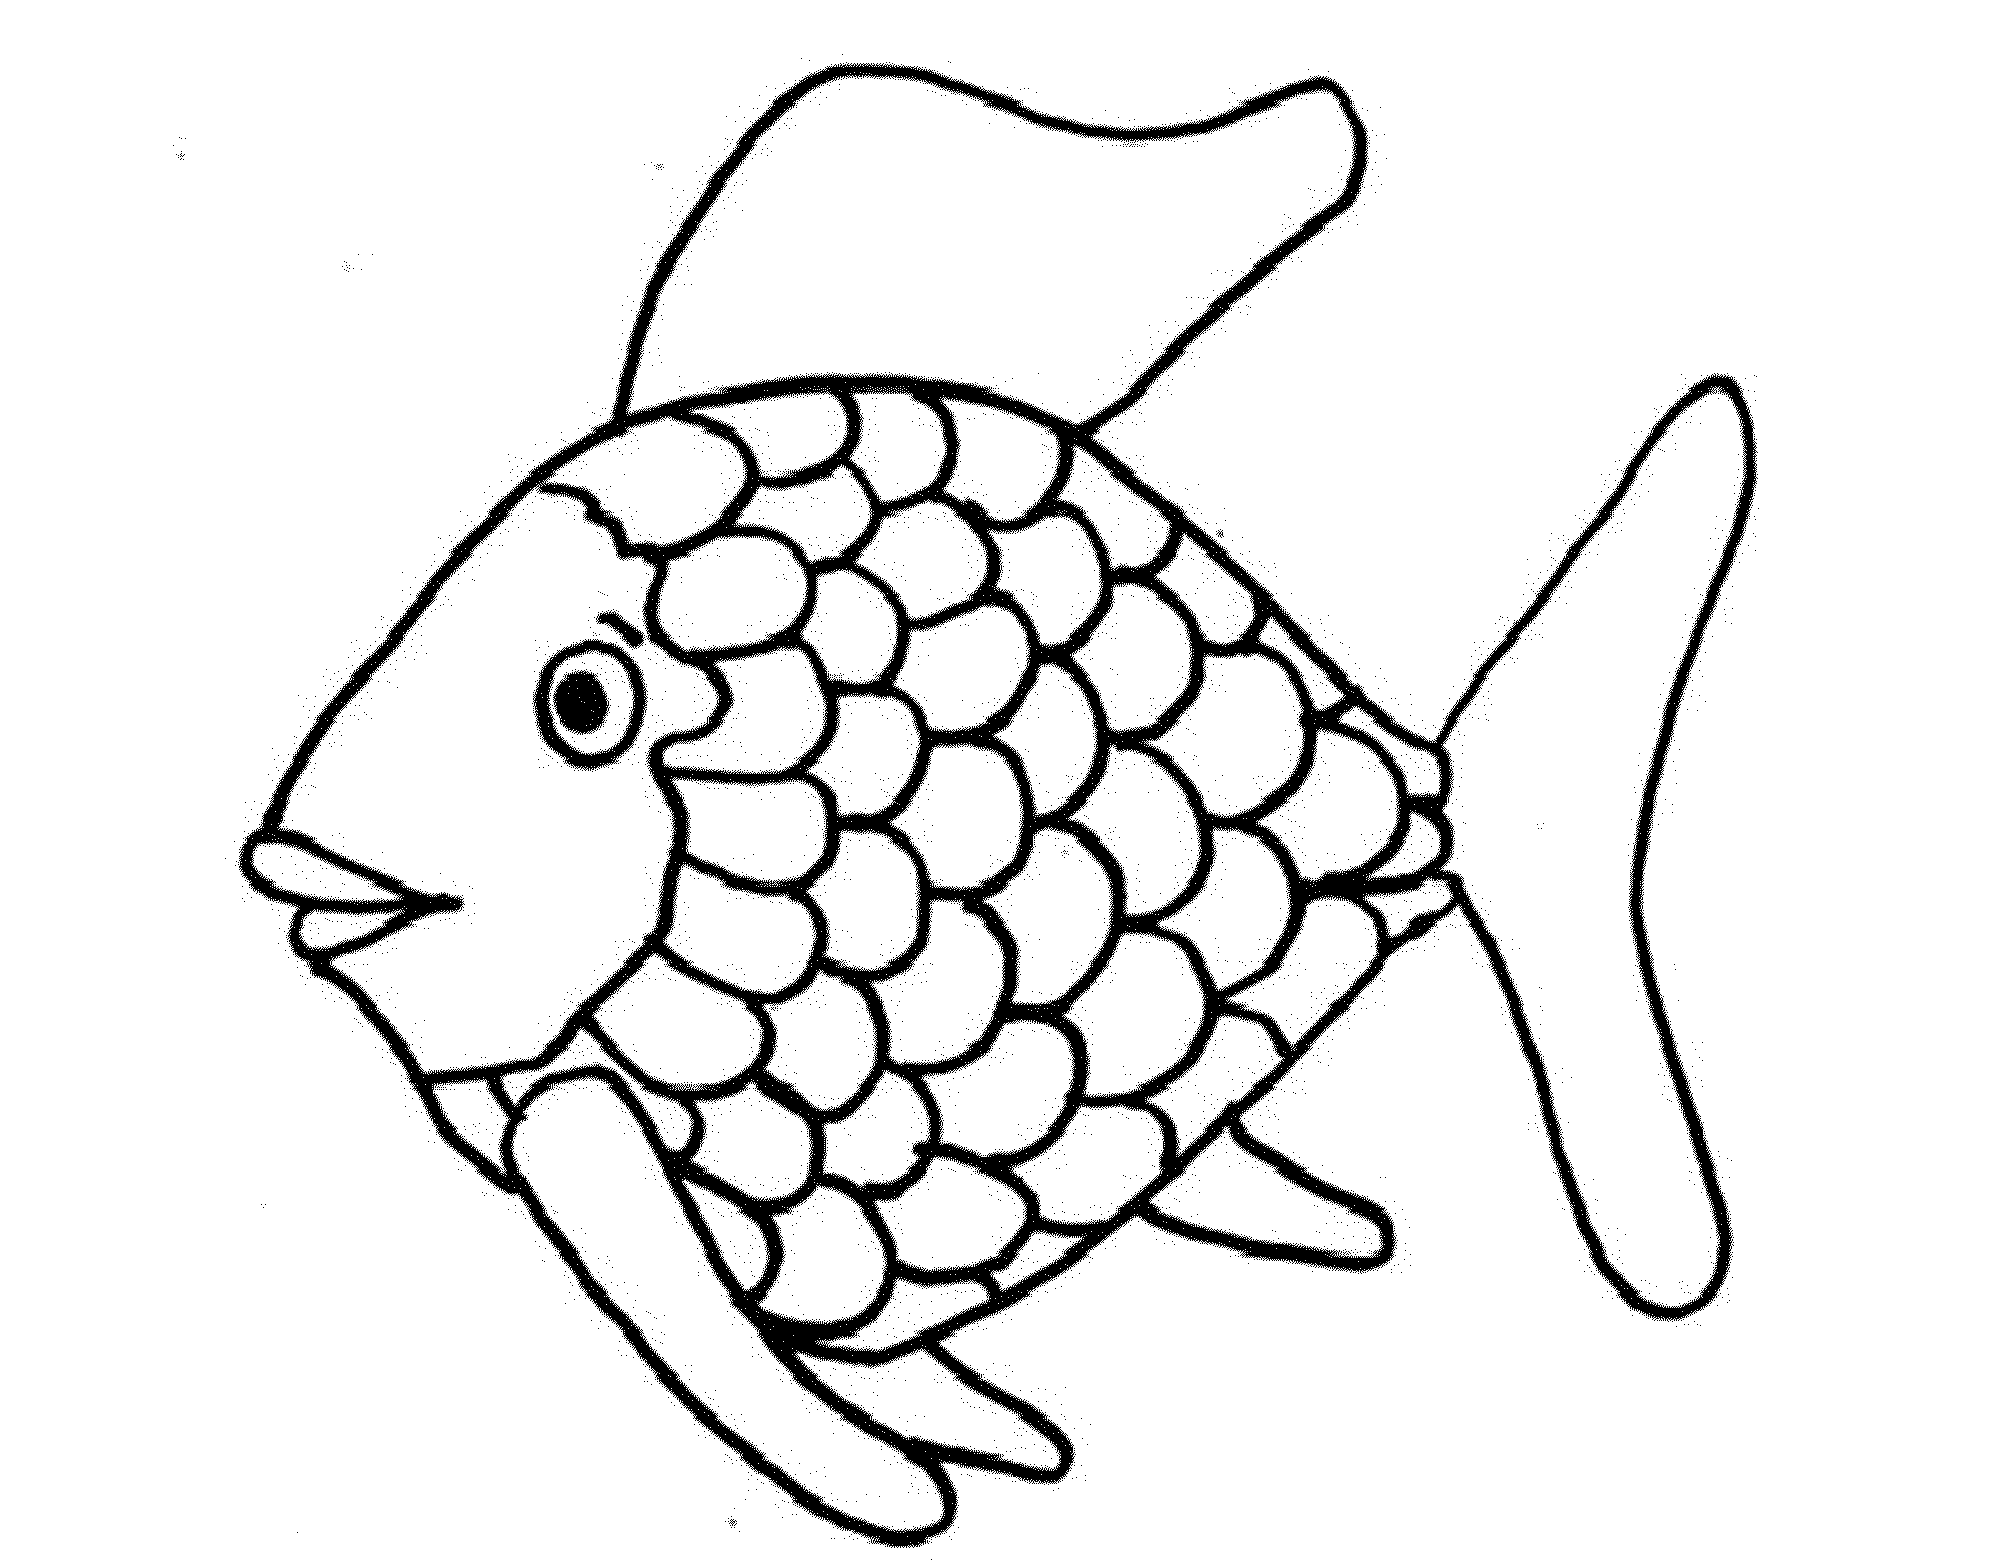 Rainbow Fish Printable Coloring Page Coloring Home